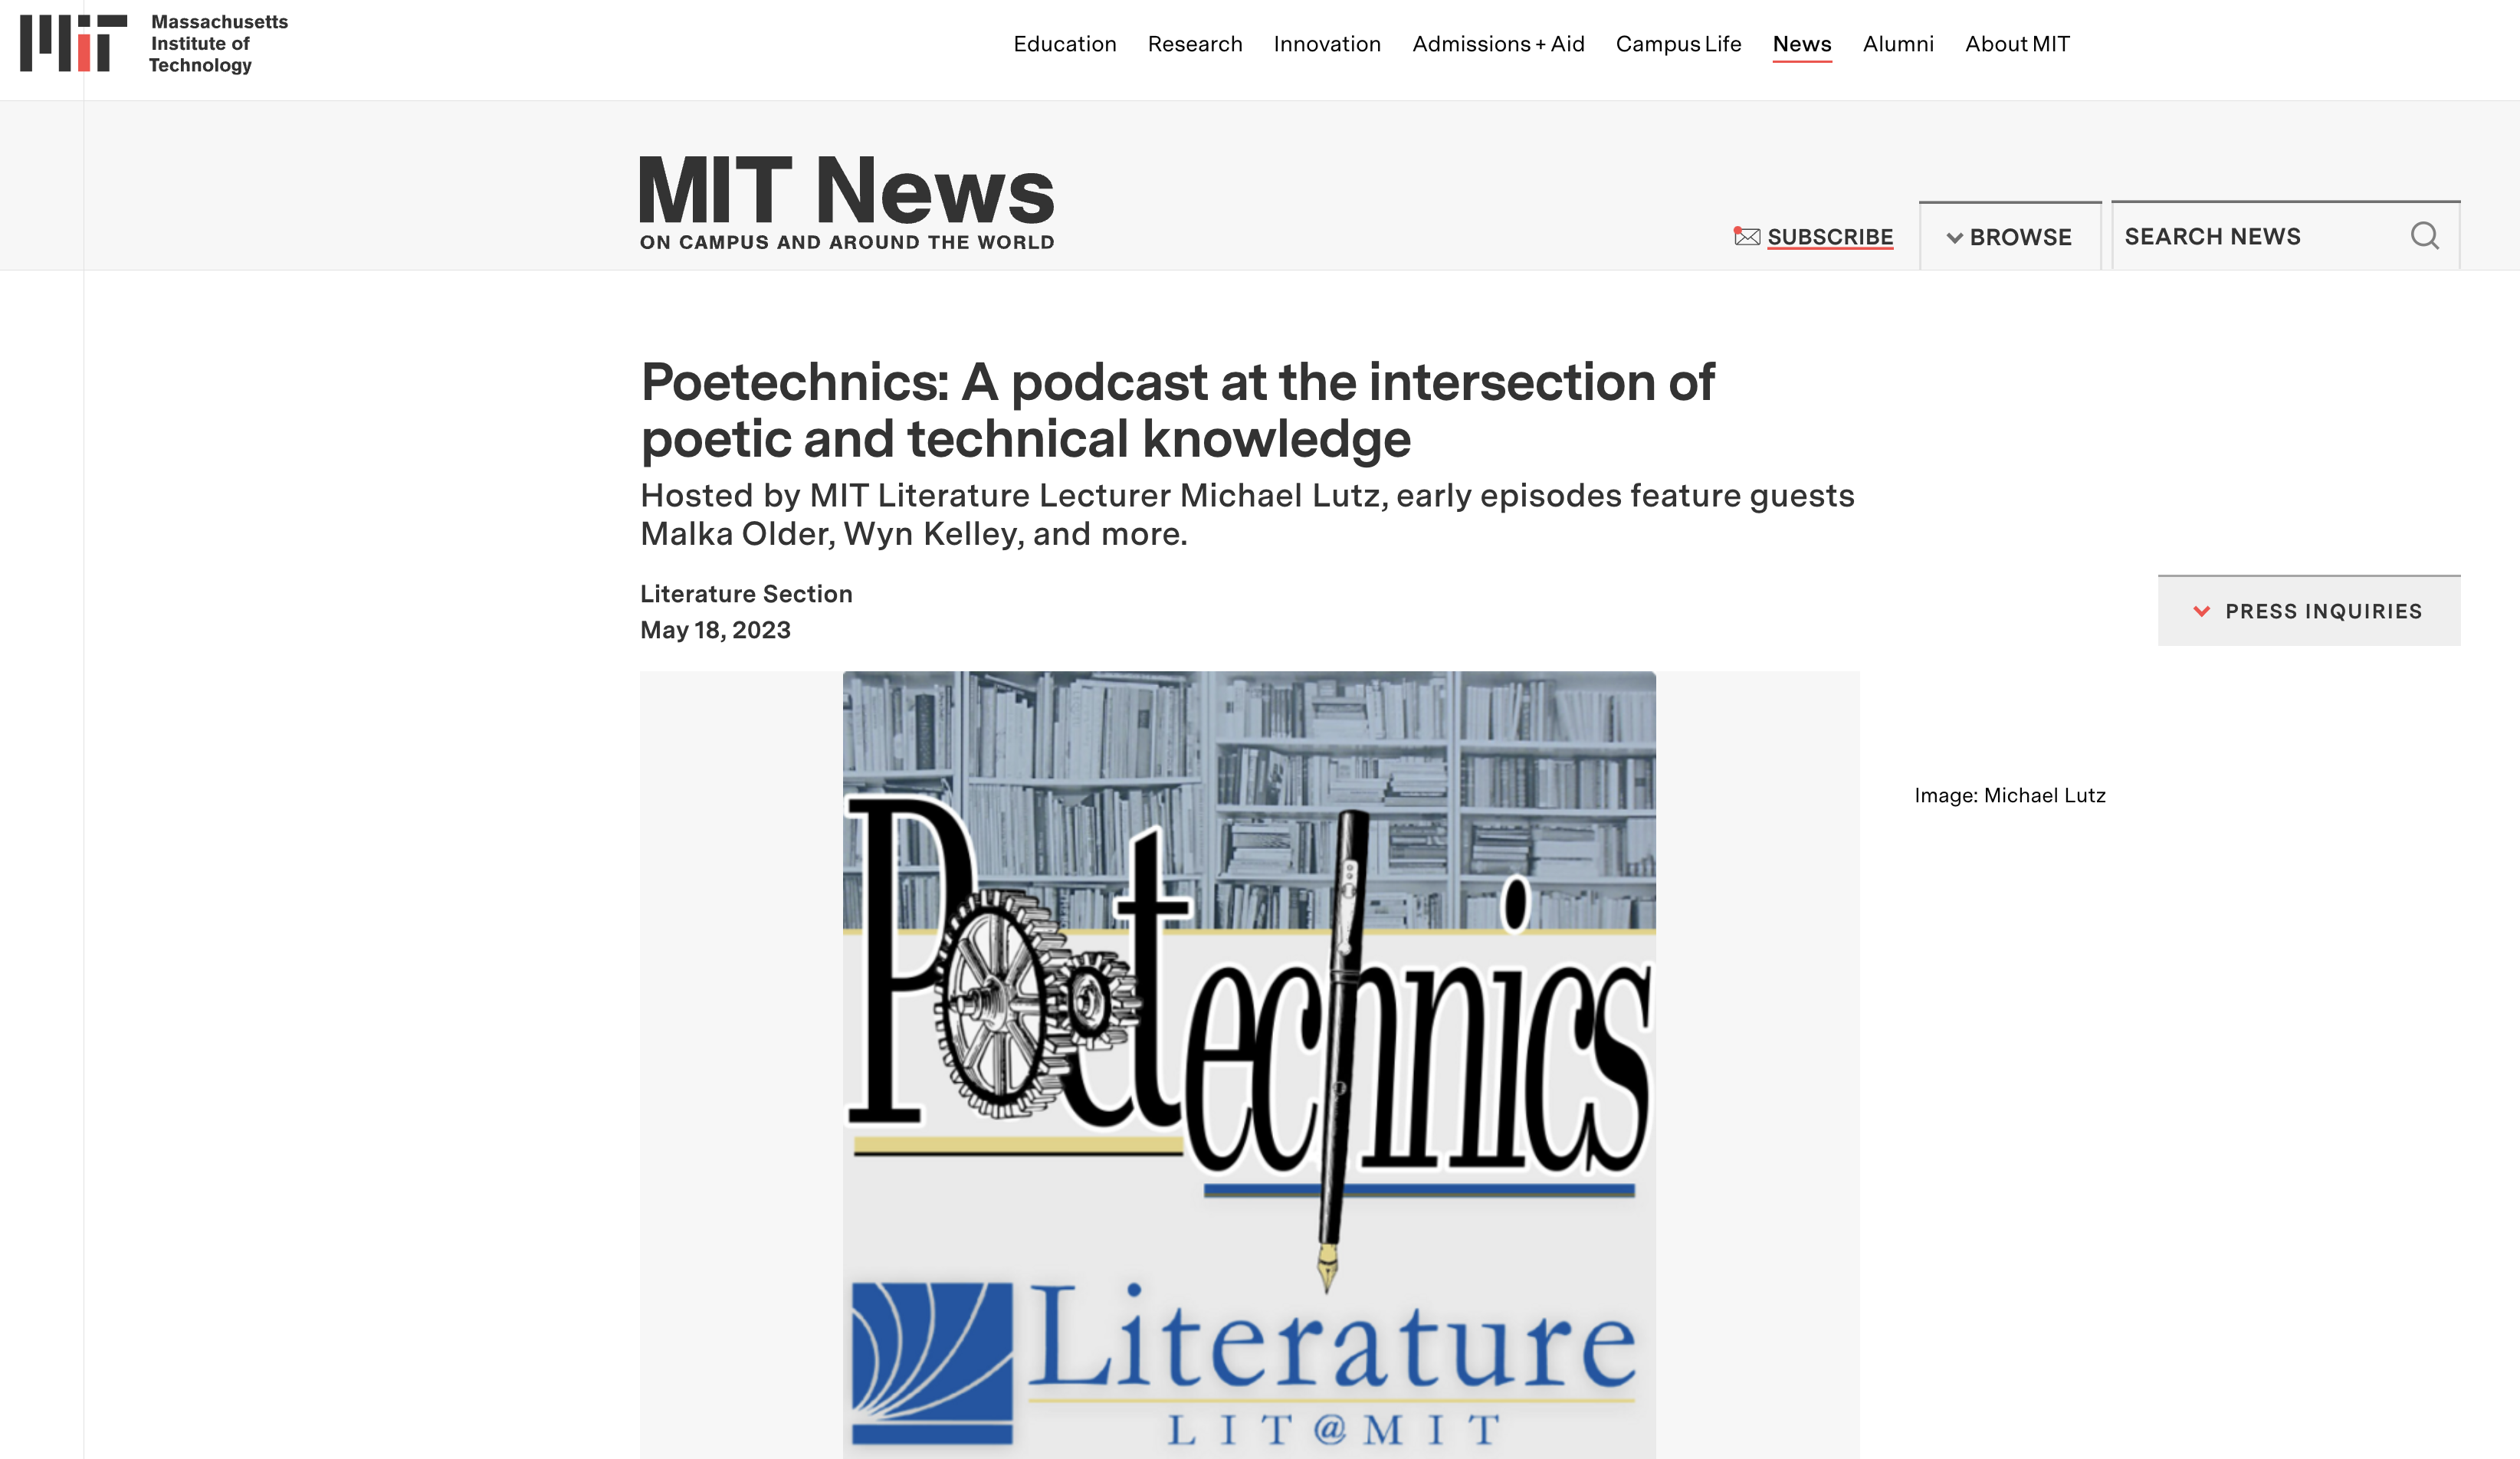 MIT News announces, “Poetechnics: A podcast at the intersection of poetic and technical knowledge”